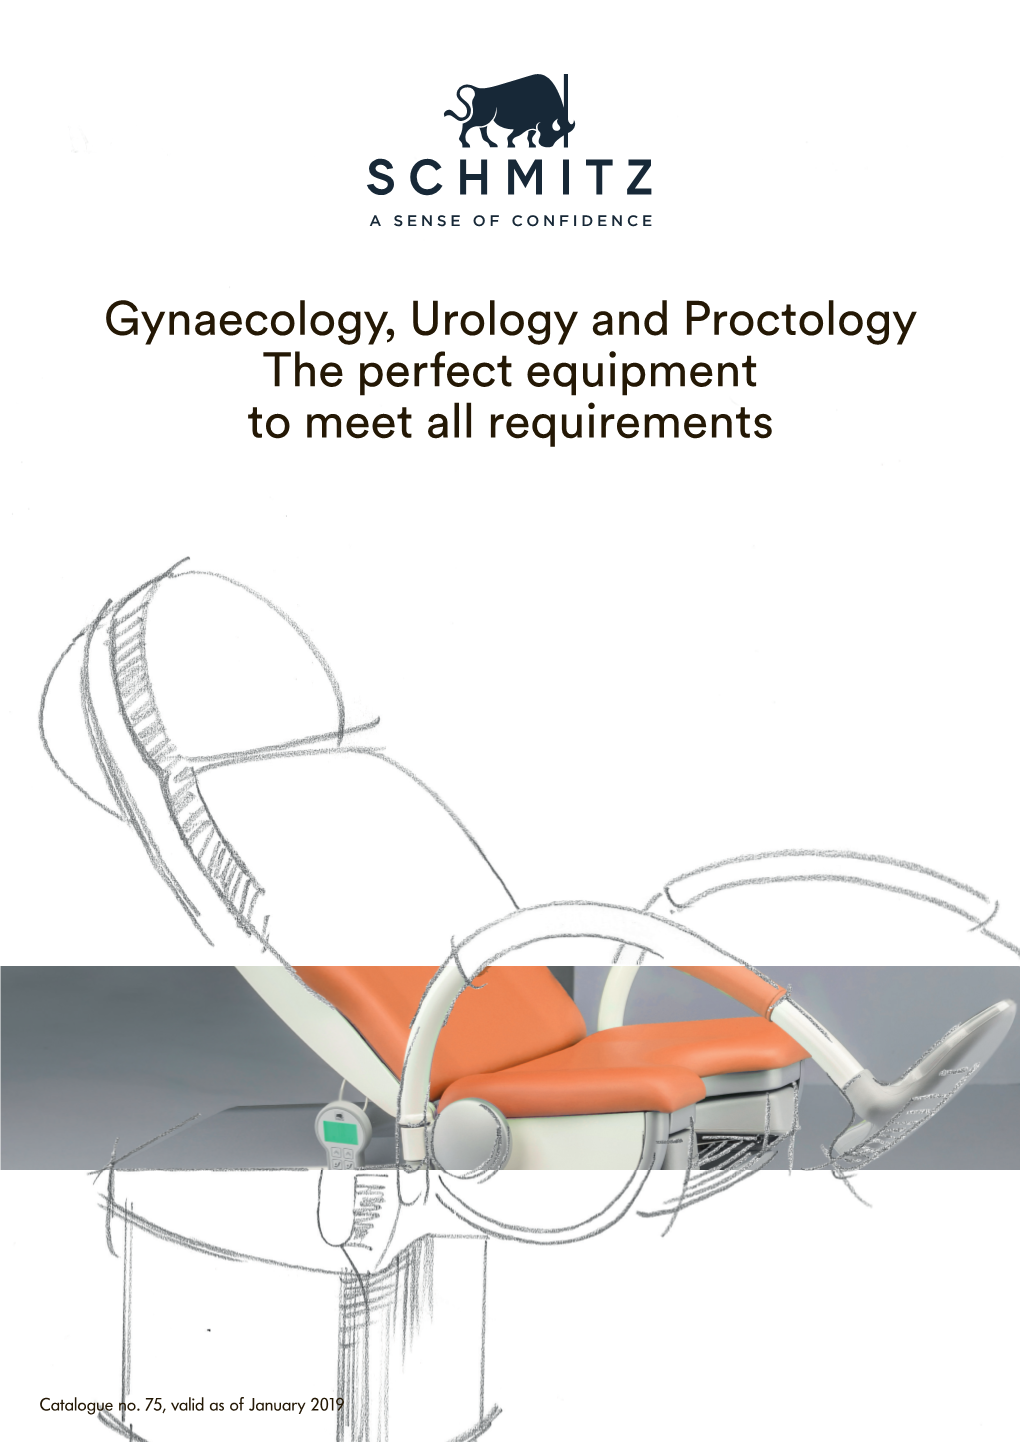 Gynaecology, Urology and Proctology the Perfect Equipment to Meet All Requirements